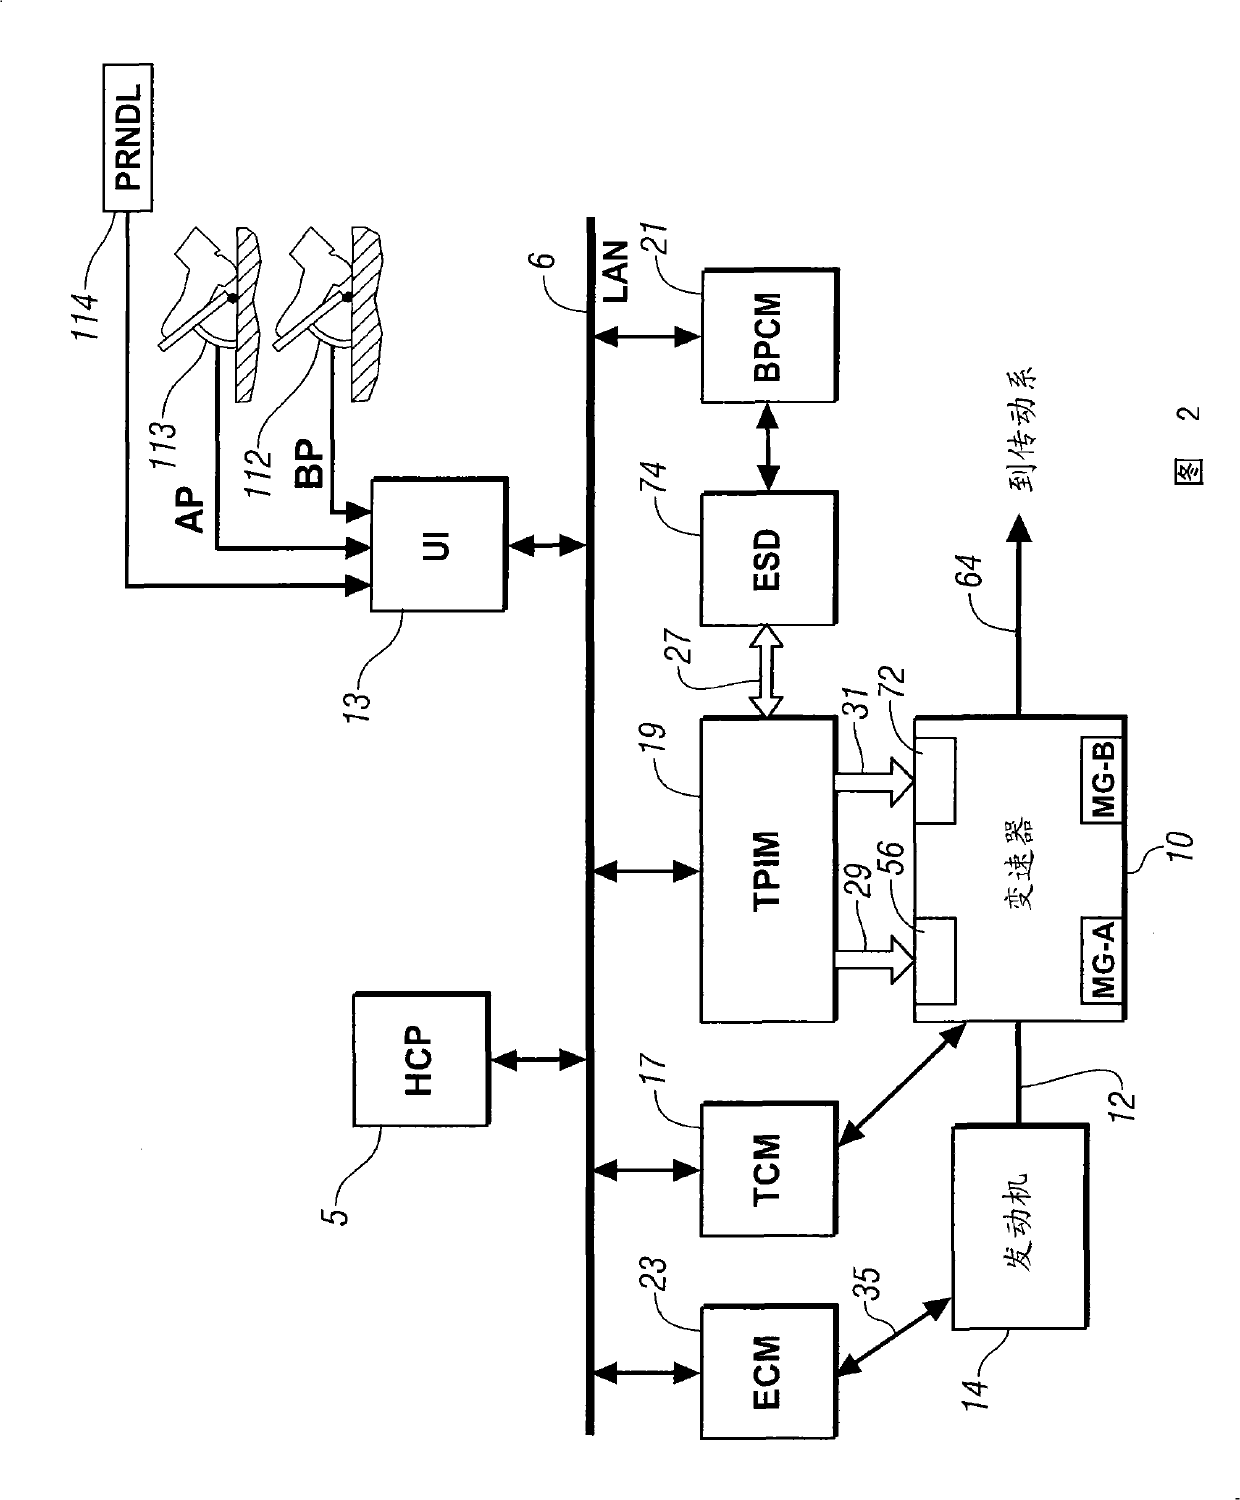 Method and apparatus to control off-going clutch torque during torque phase